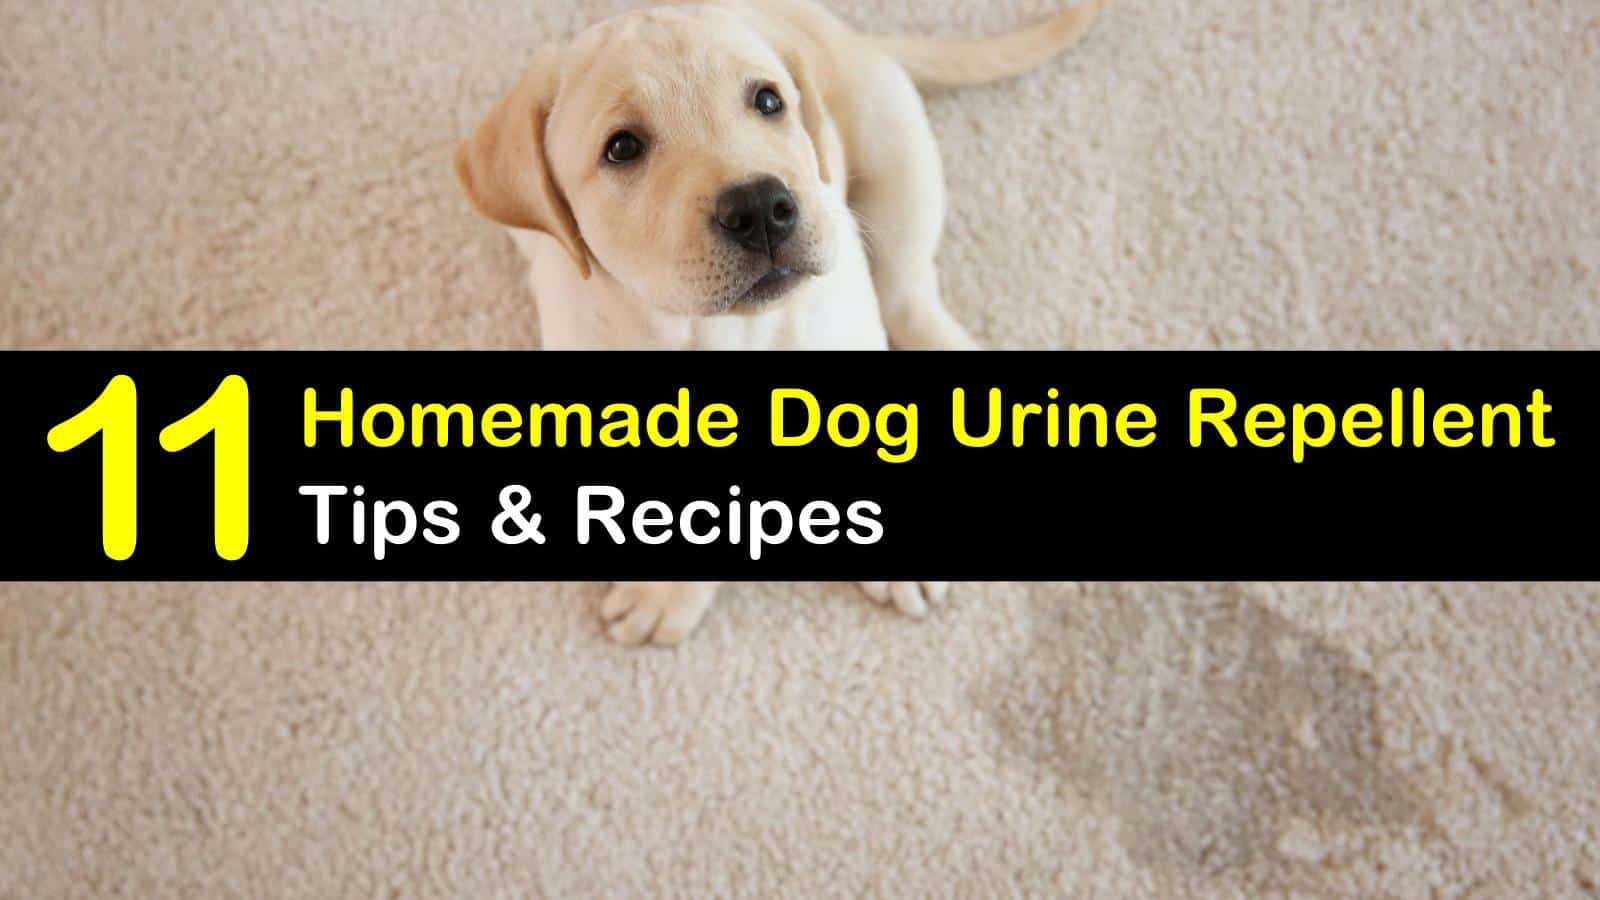 Keeping Dogs Away 11 Homemade Dog Urine Repellent Tips And Recipes